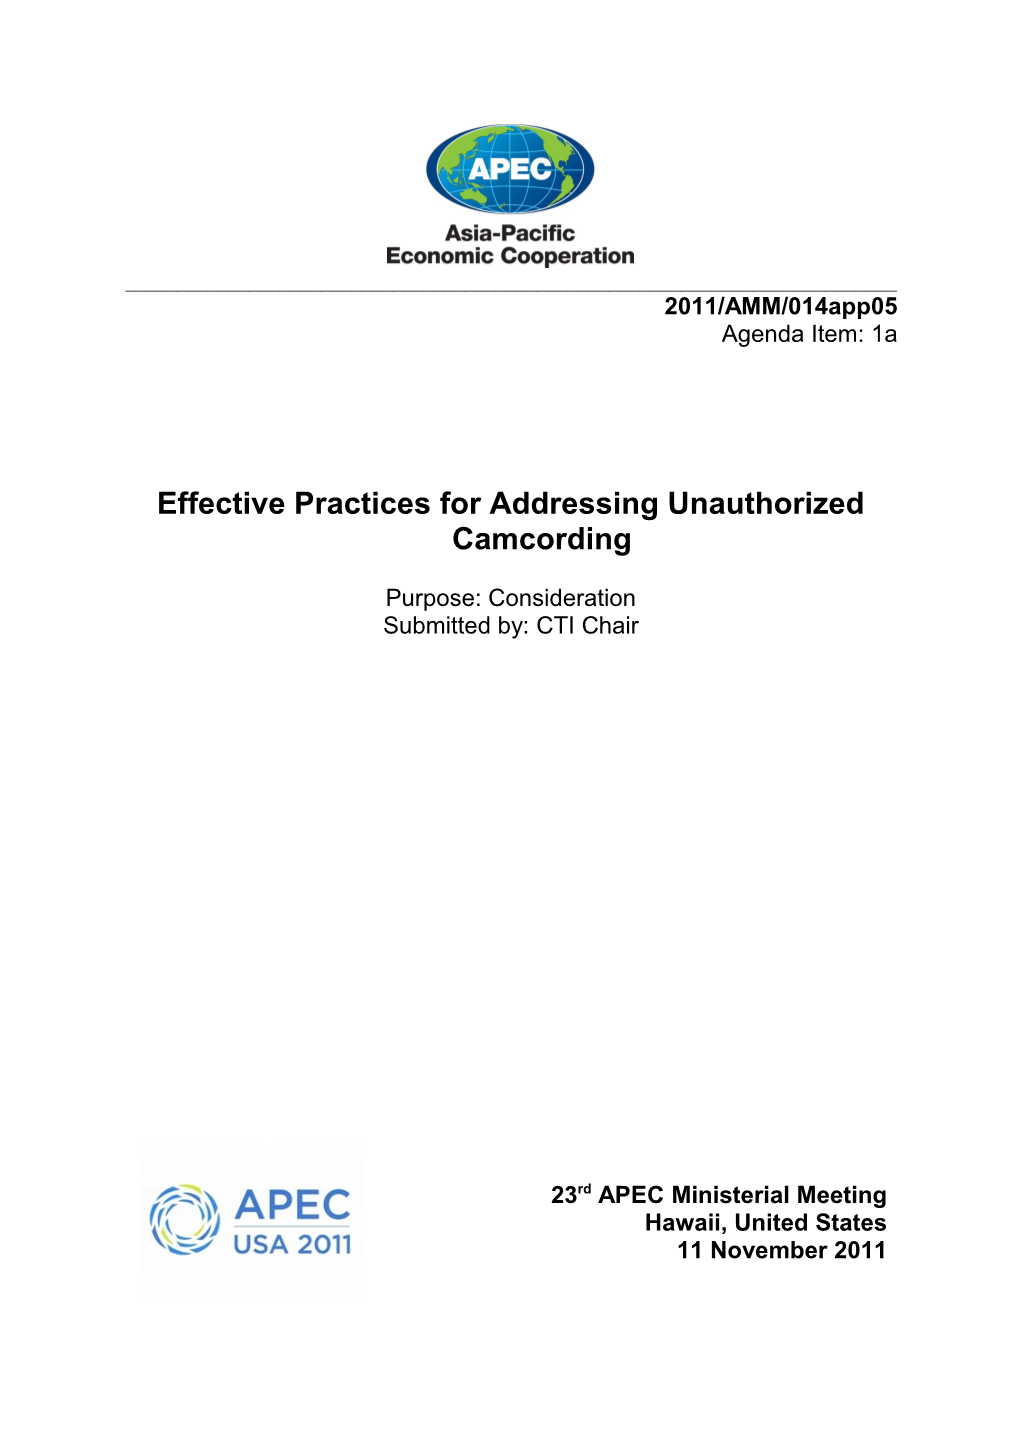 Effective Practices for Addressing Unauthorized Camcording